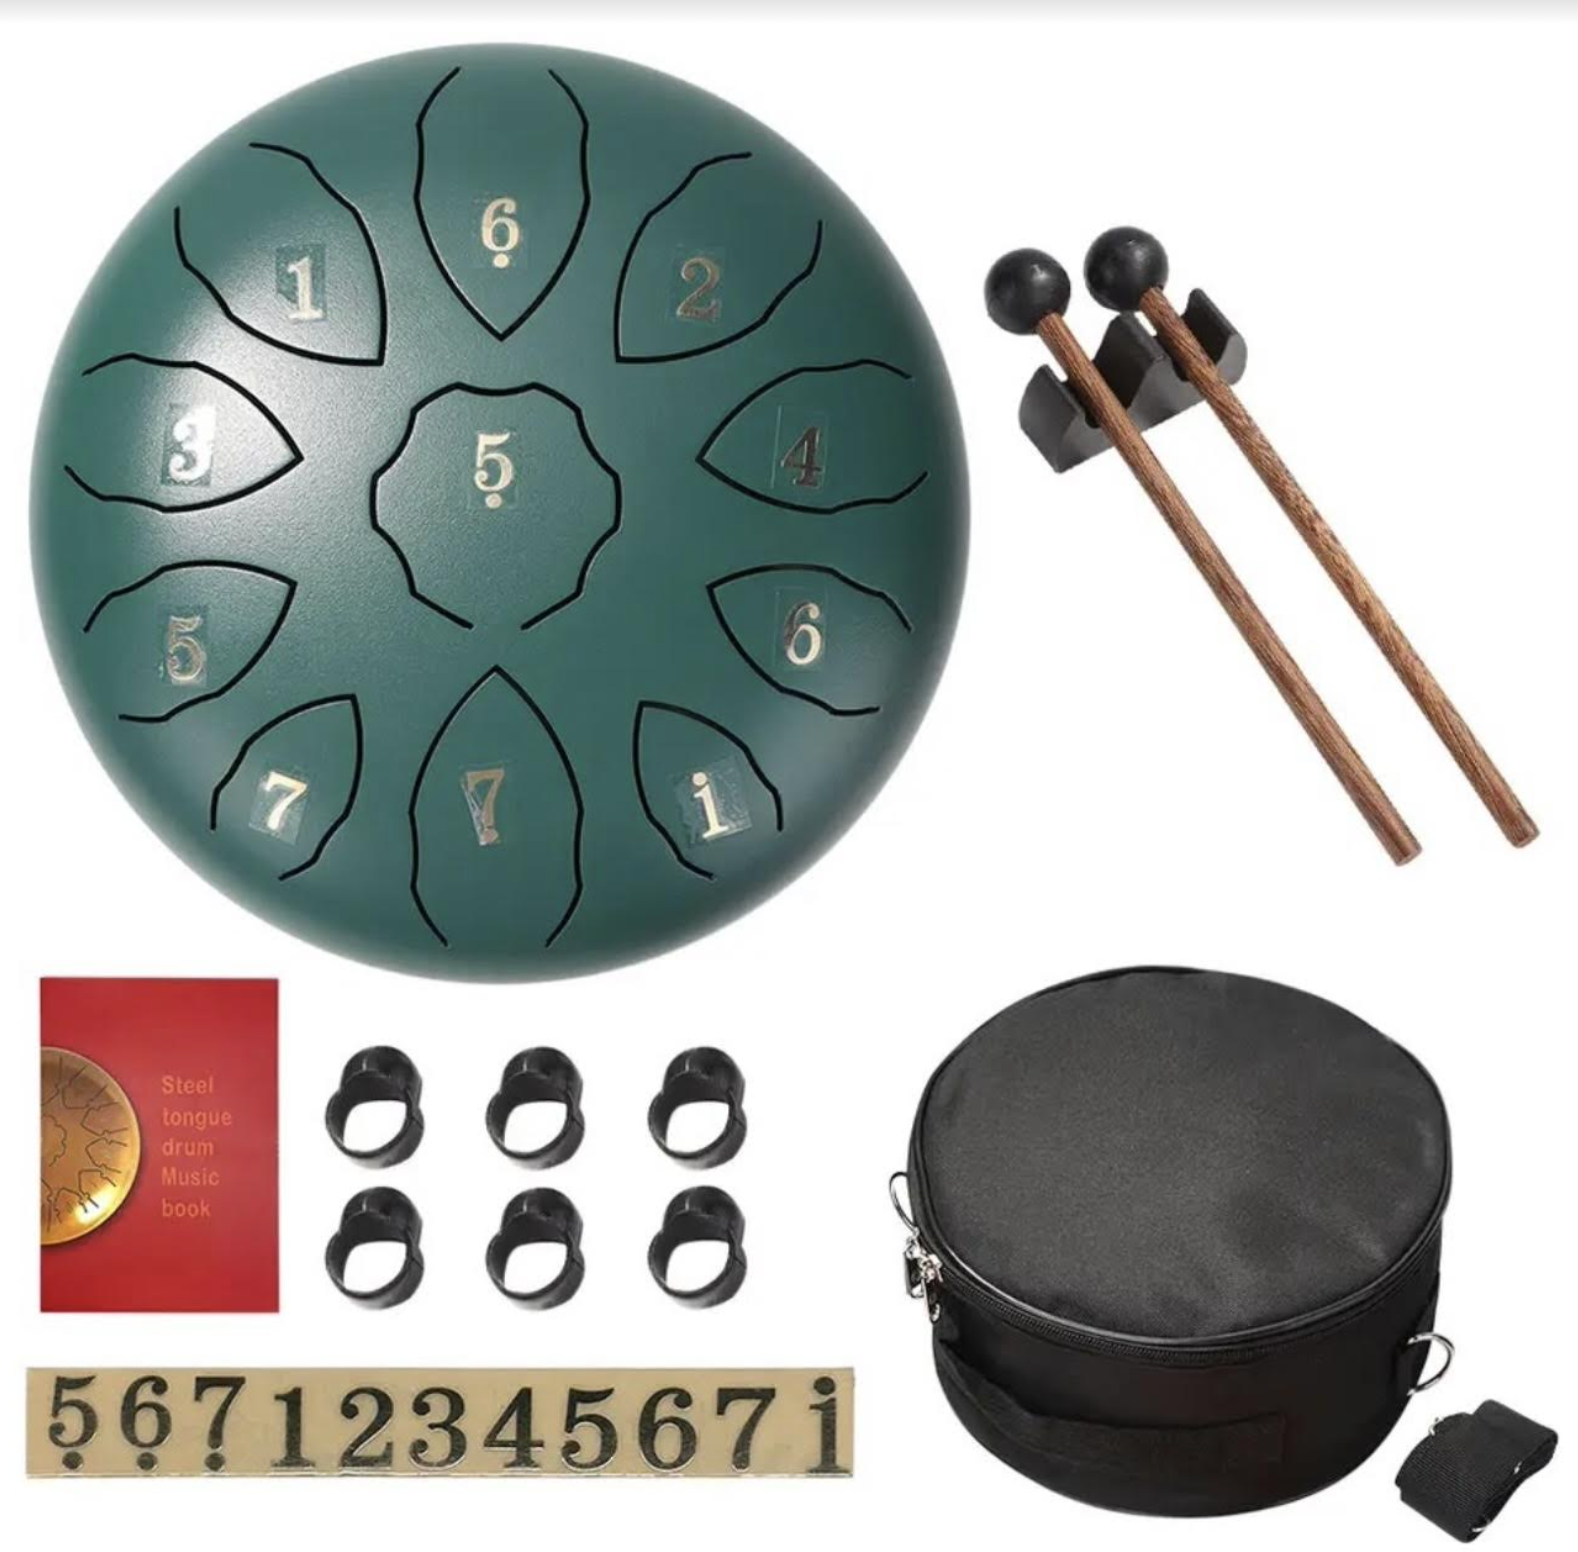 Steel Tongue 8 Green Drum (Black Case Hammers & Instructions